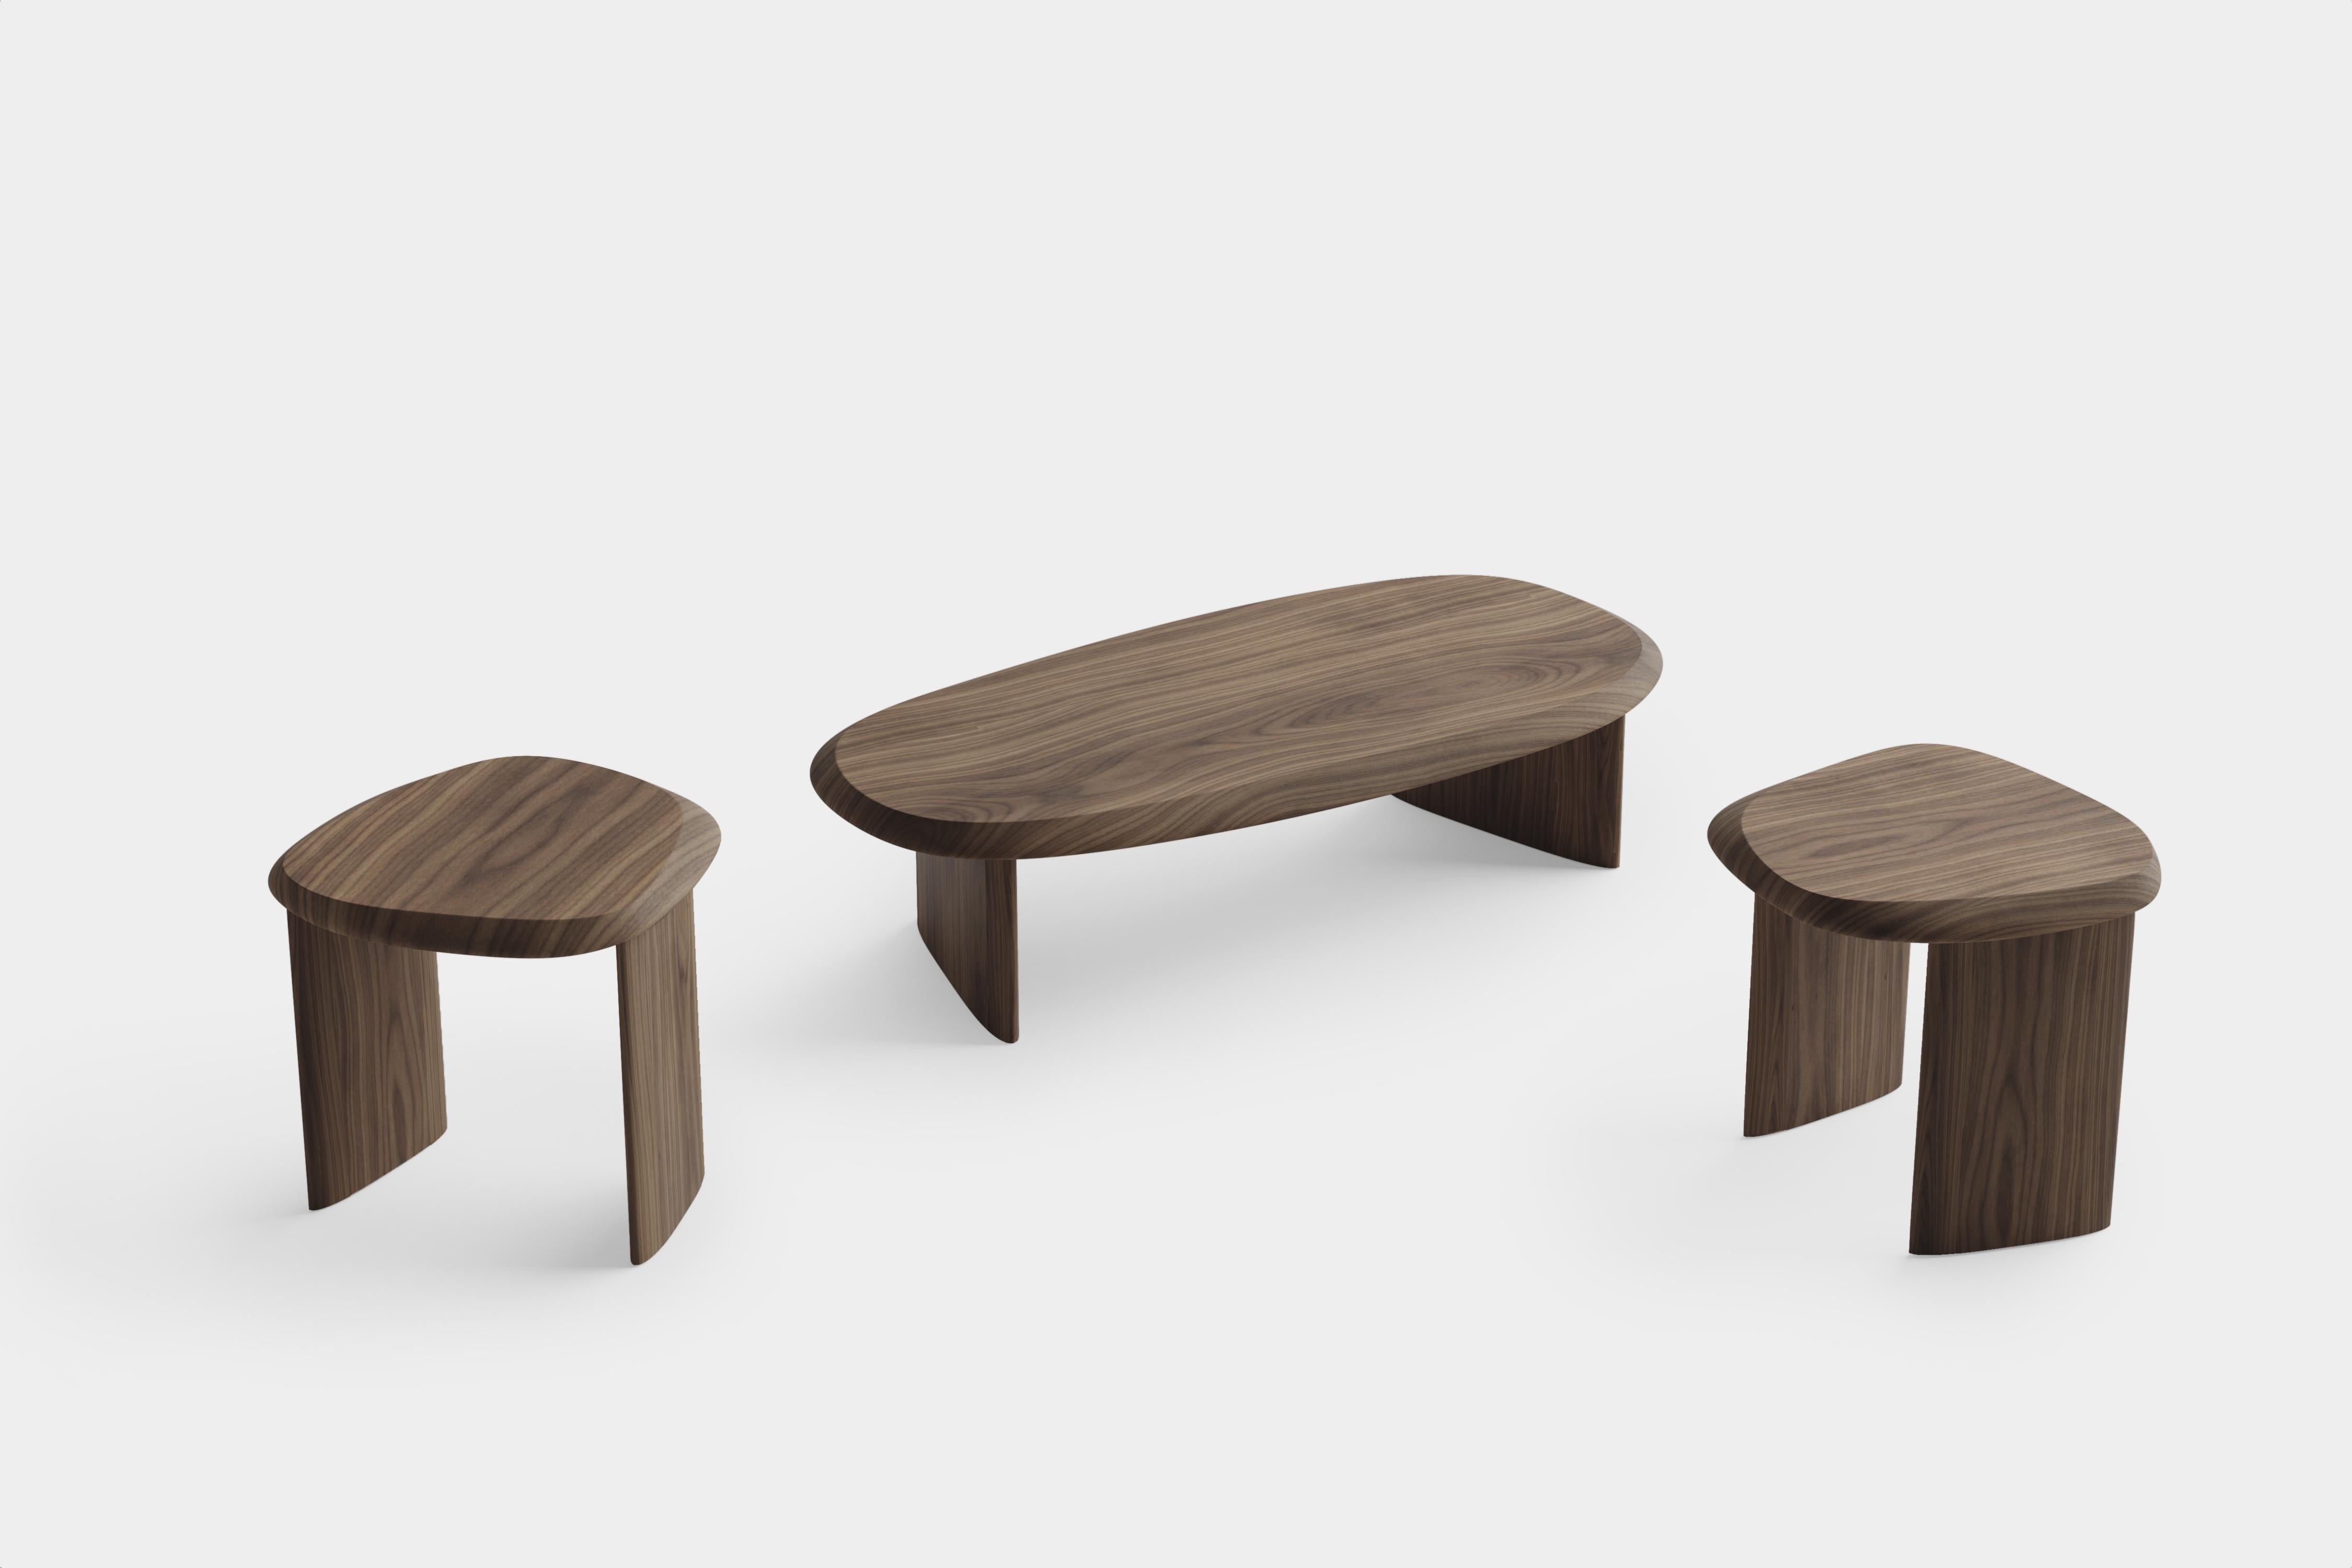 Set of two nest tables from the Duna Collection. Delicately crafted to resemble a serene landscape through its carefully polished table top surface and its fluid smooth walnut wood base. Combination of finishes available.

Its generous measures